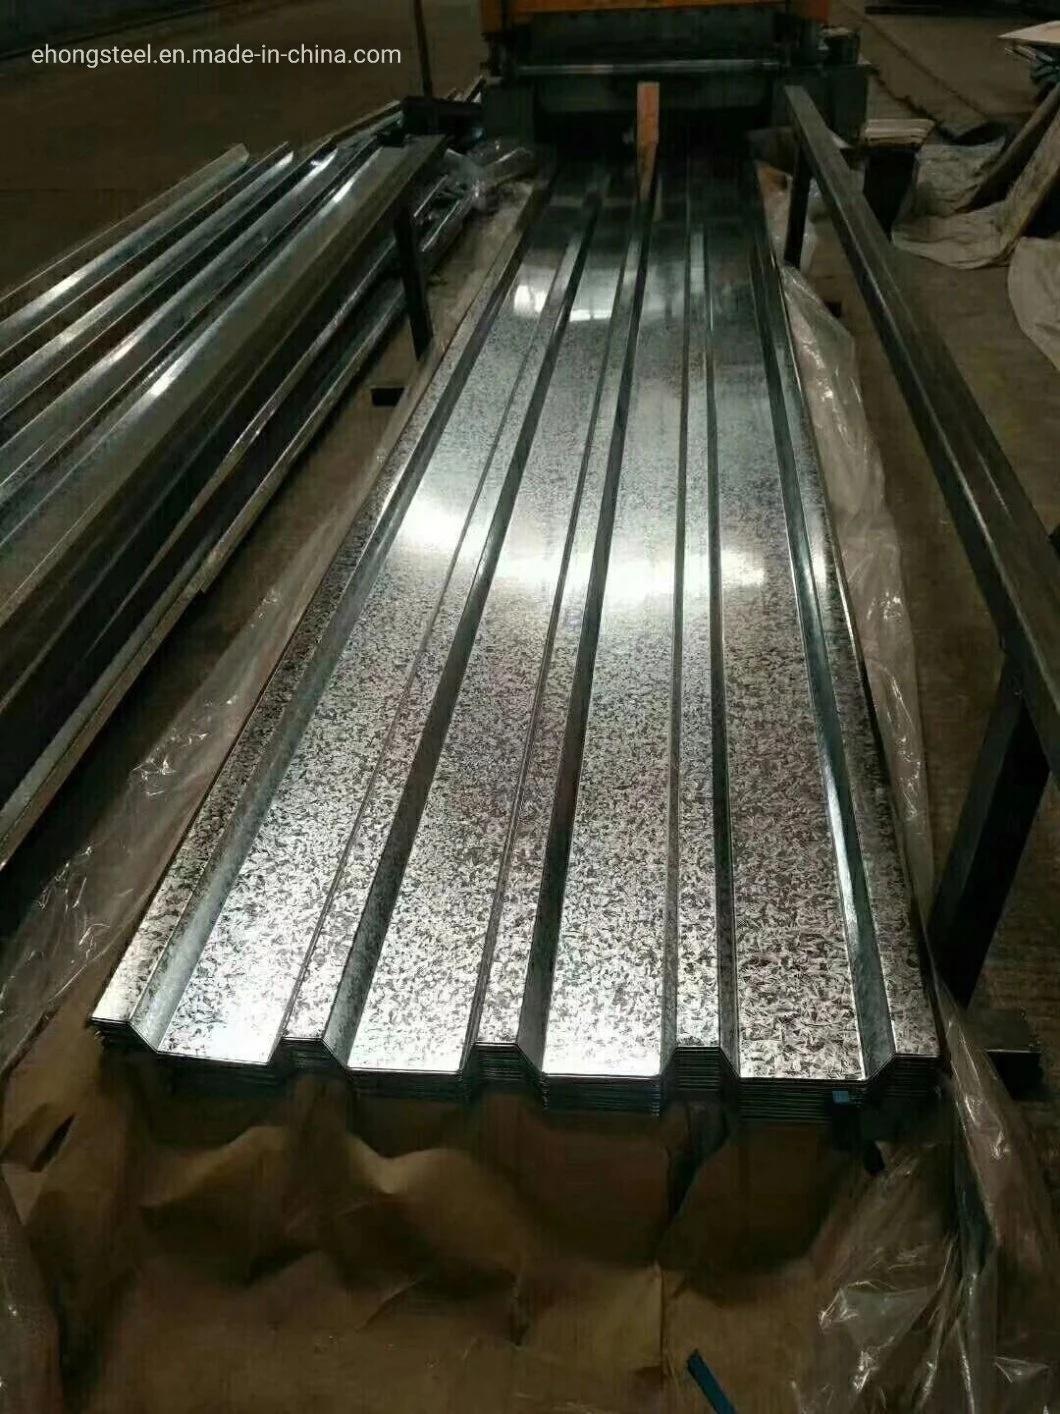 Zinc Corrugated Metal Roofing Sheet Ibr Roofing Building Materials